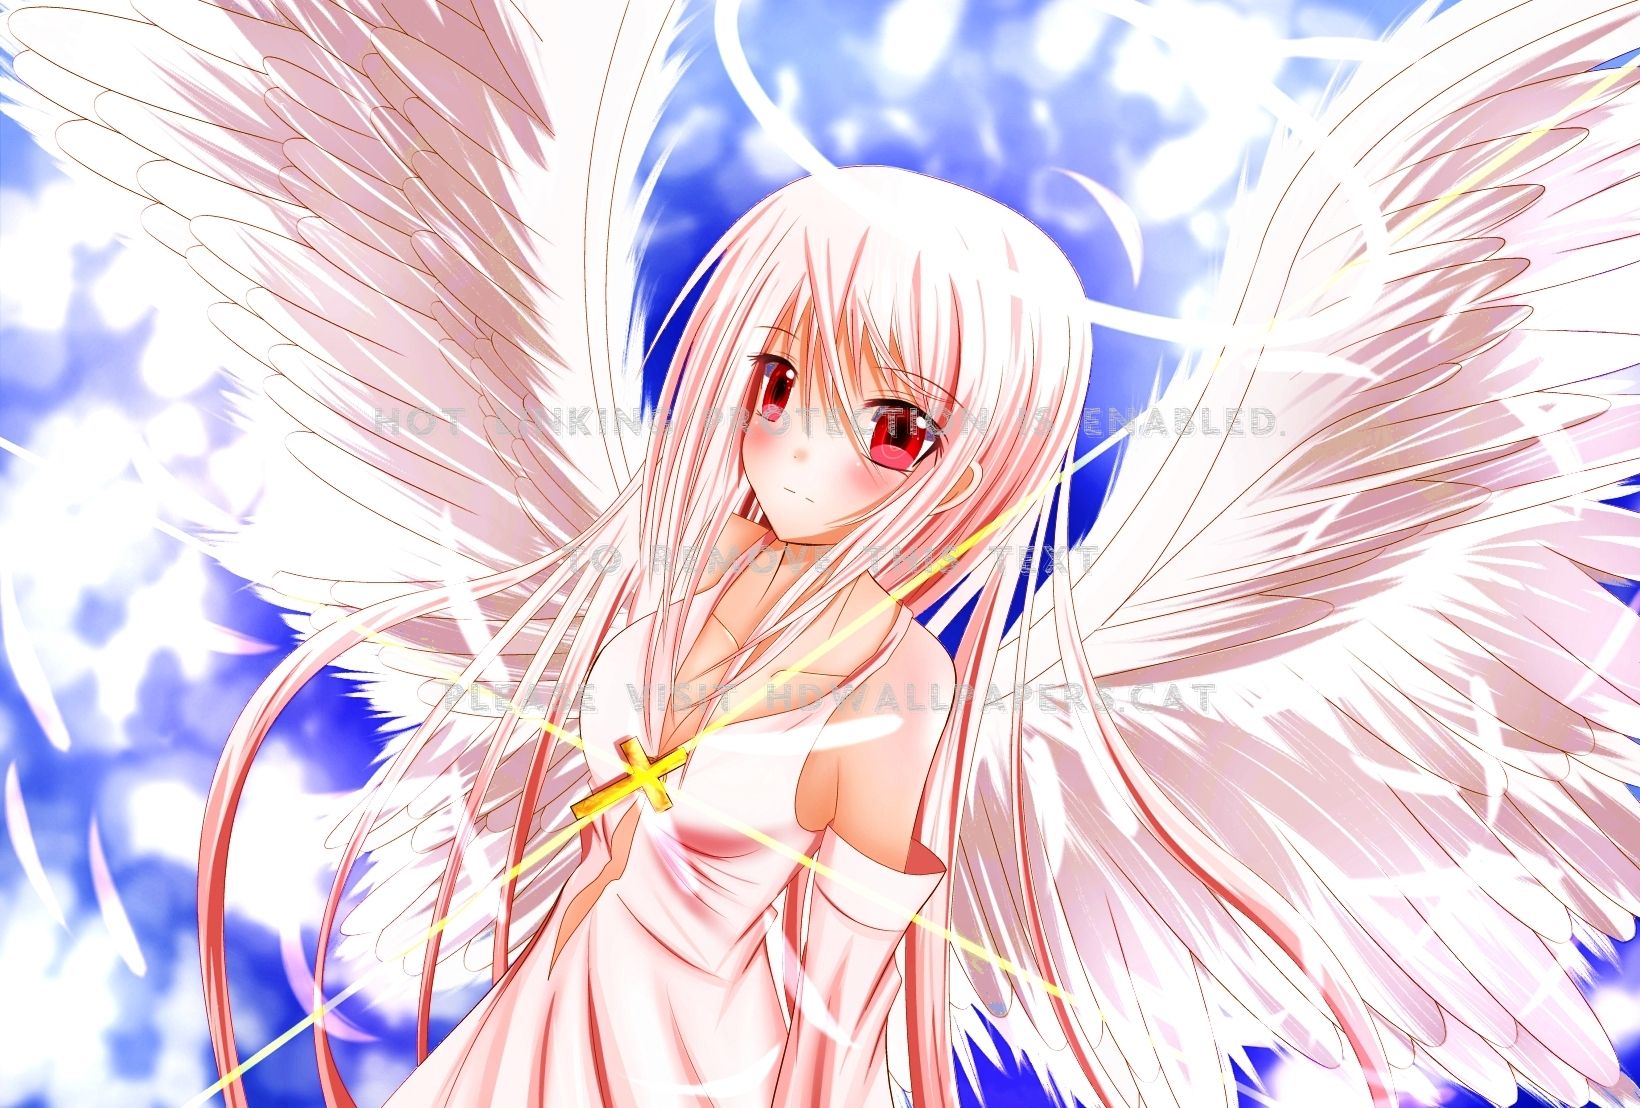 Cute Angel Anime Girl Wallpapers - Wallpaper Cave